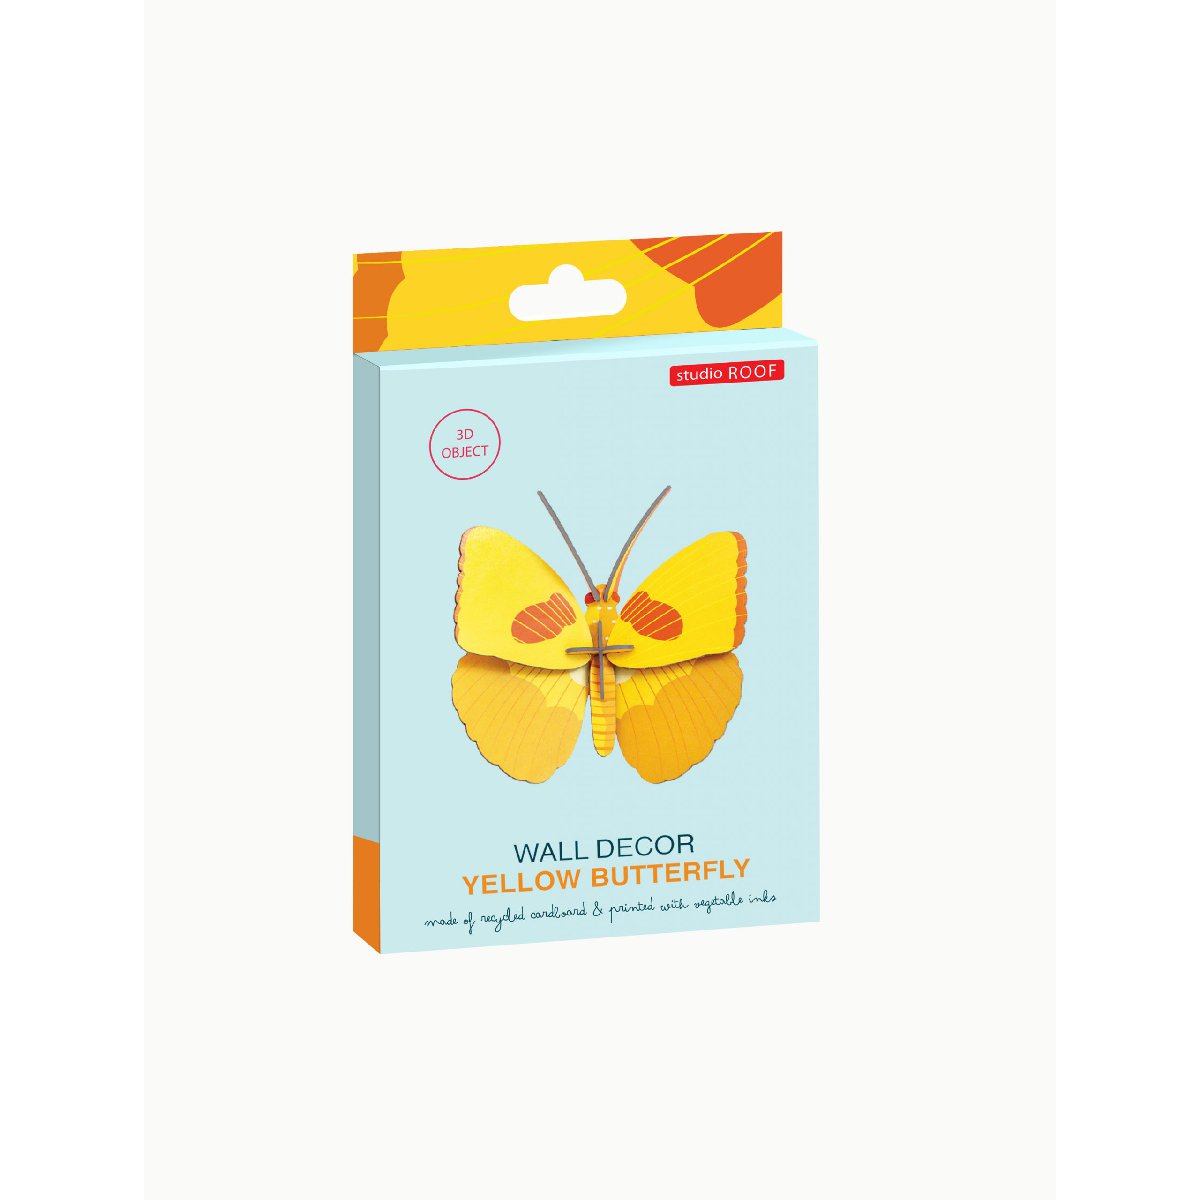 Studio Roof | yellow butterfly wall decor - package